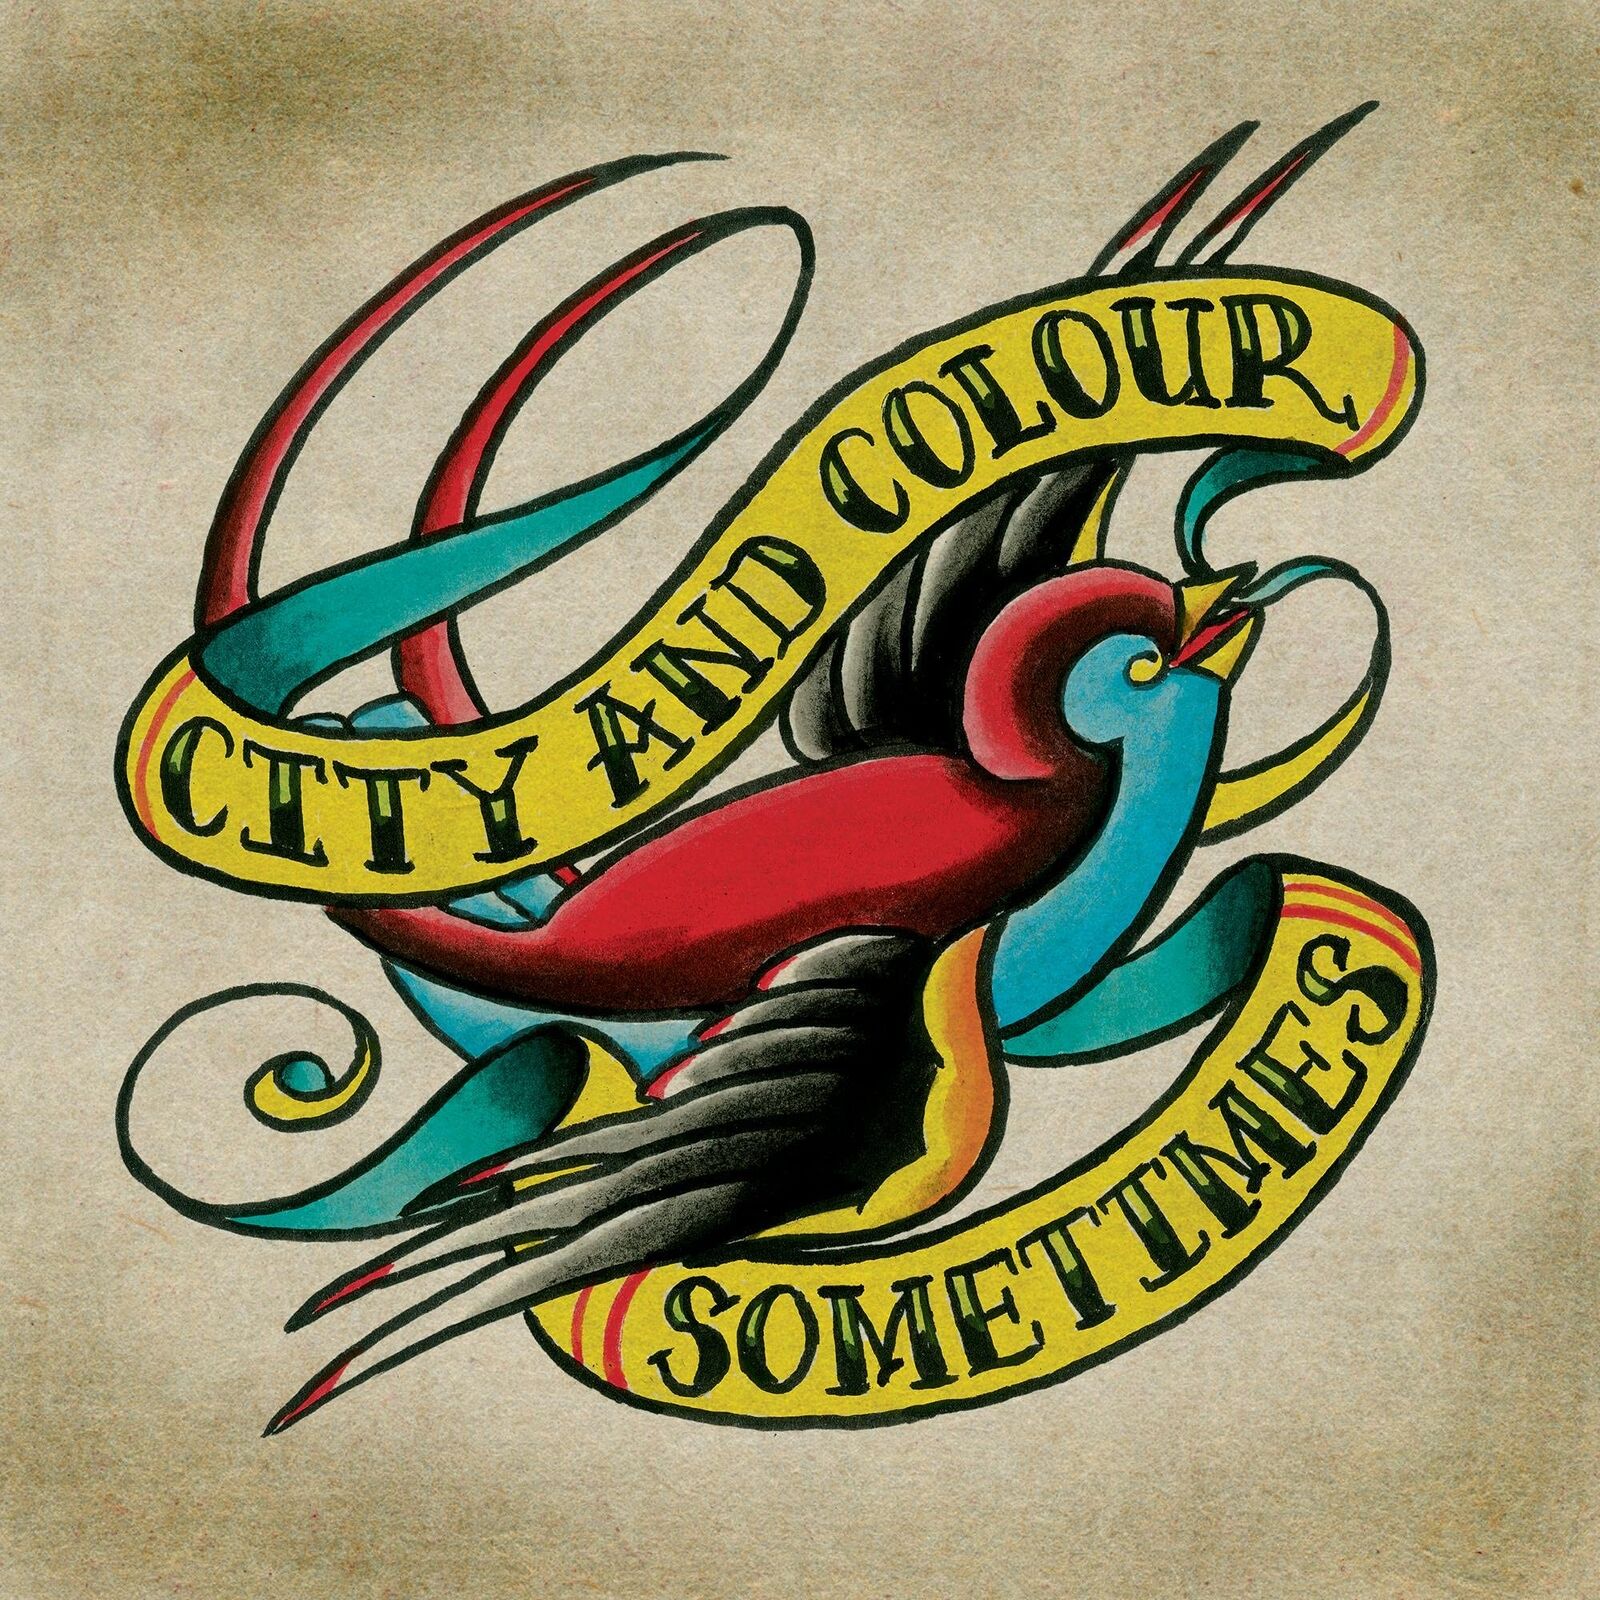 [DAMAGED] City And Colour - Sometimes